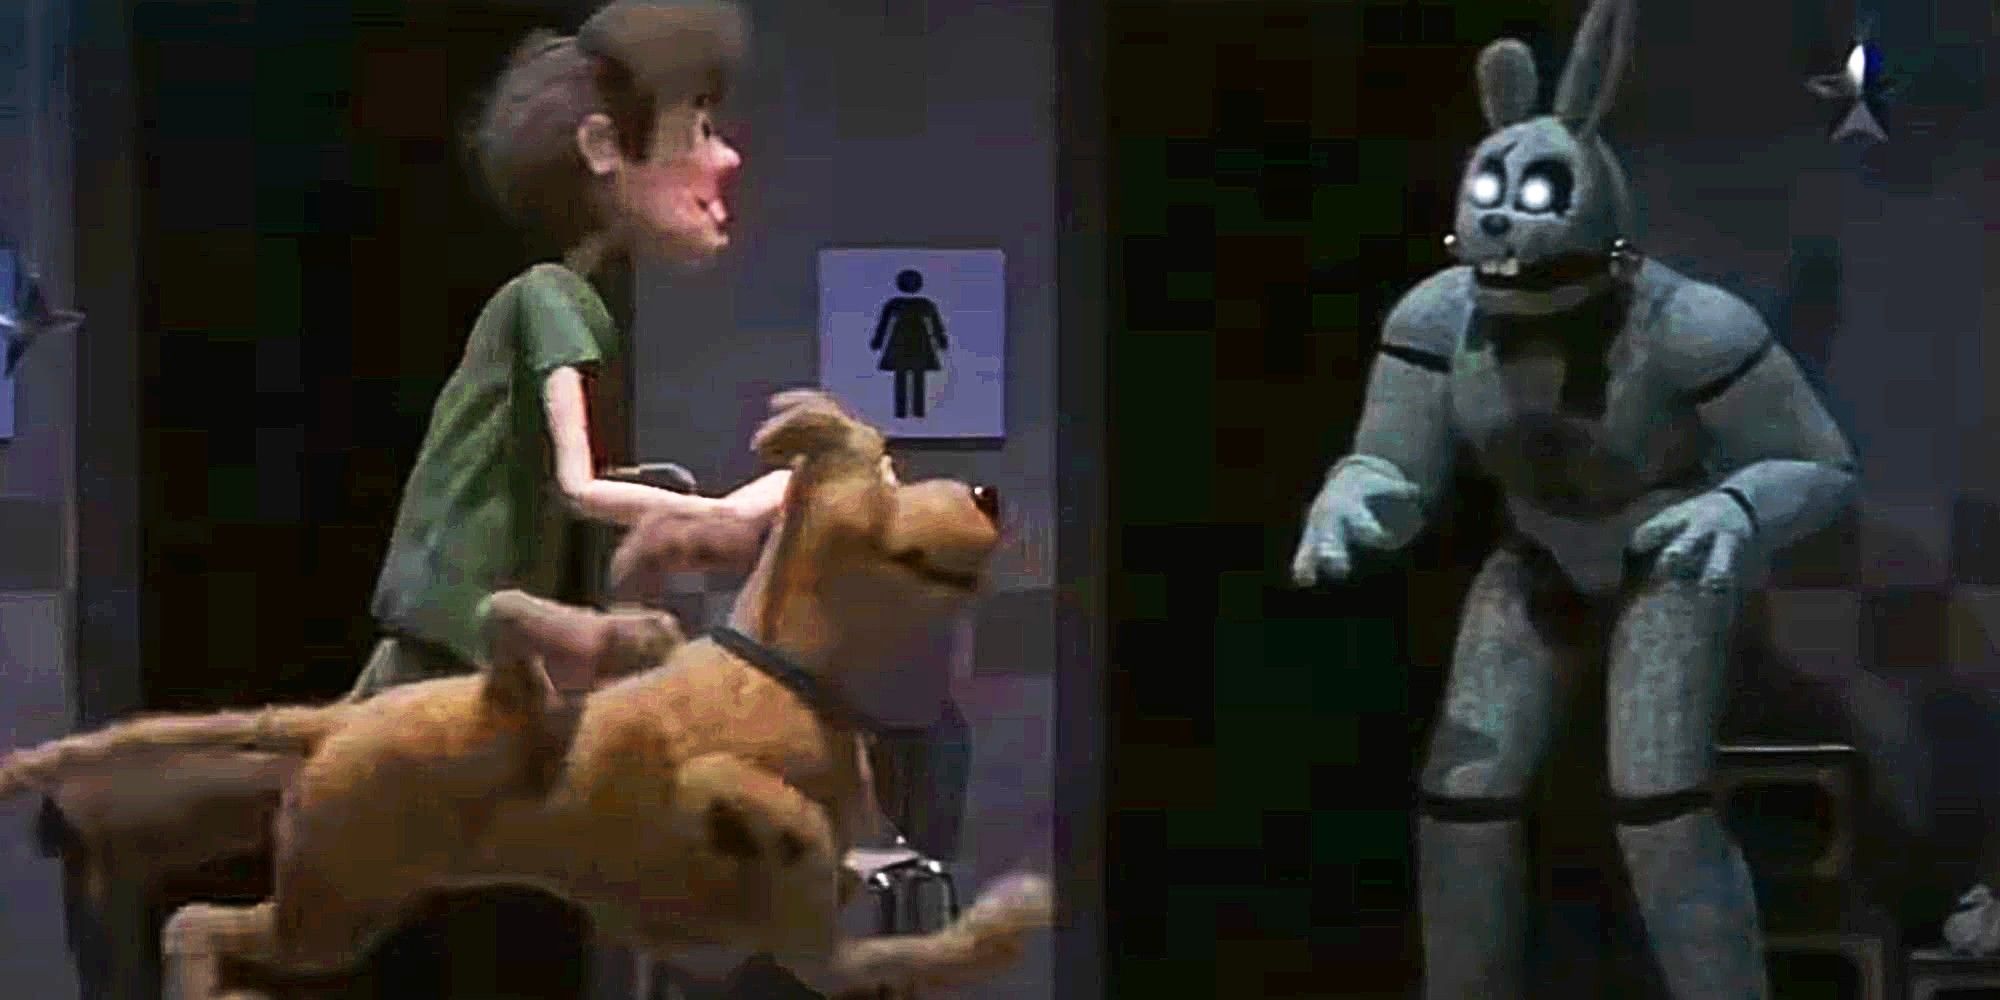 Shaggy and Scooby Doo in a stop motion Five Nights at Freddy's short